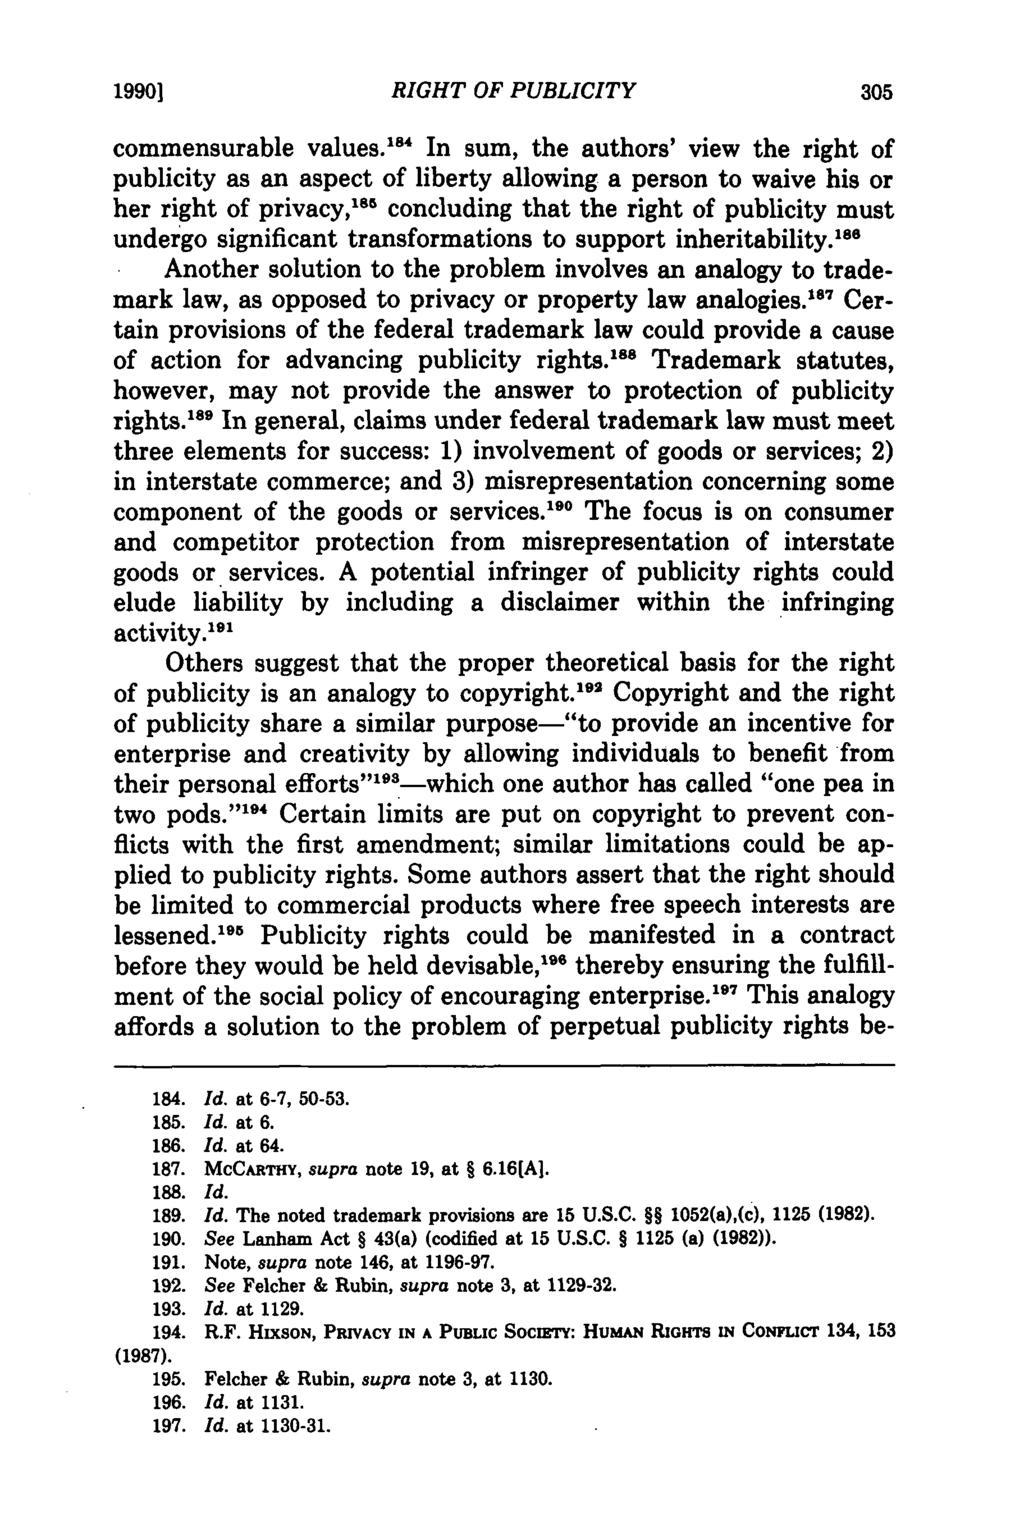 19901 Neumeyer: The Right of Publicity and its Descendibility RIGHT OF PUBLICITY commensurable values.